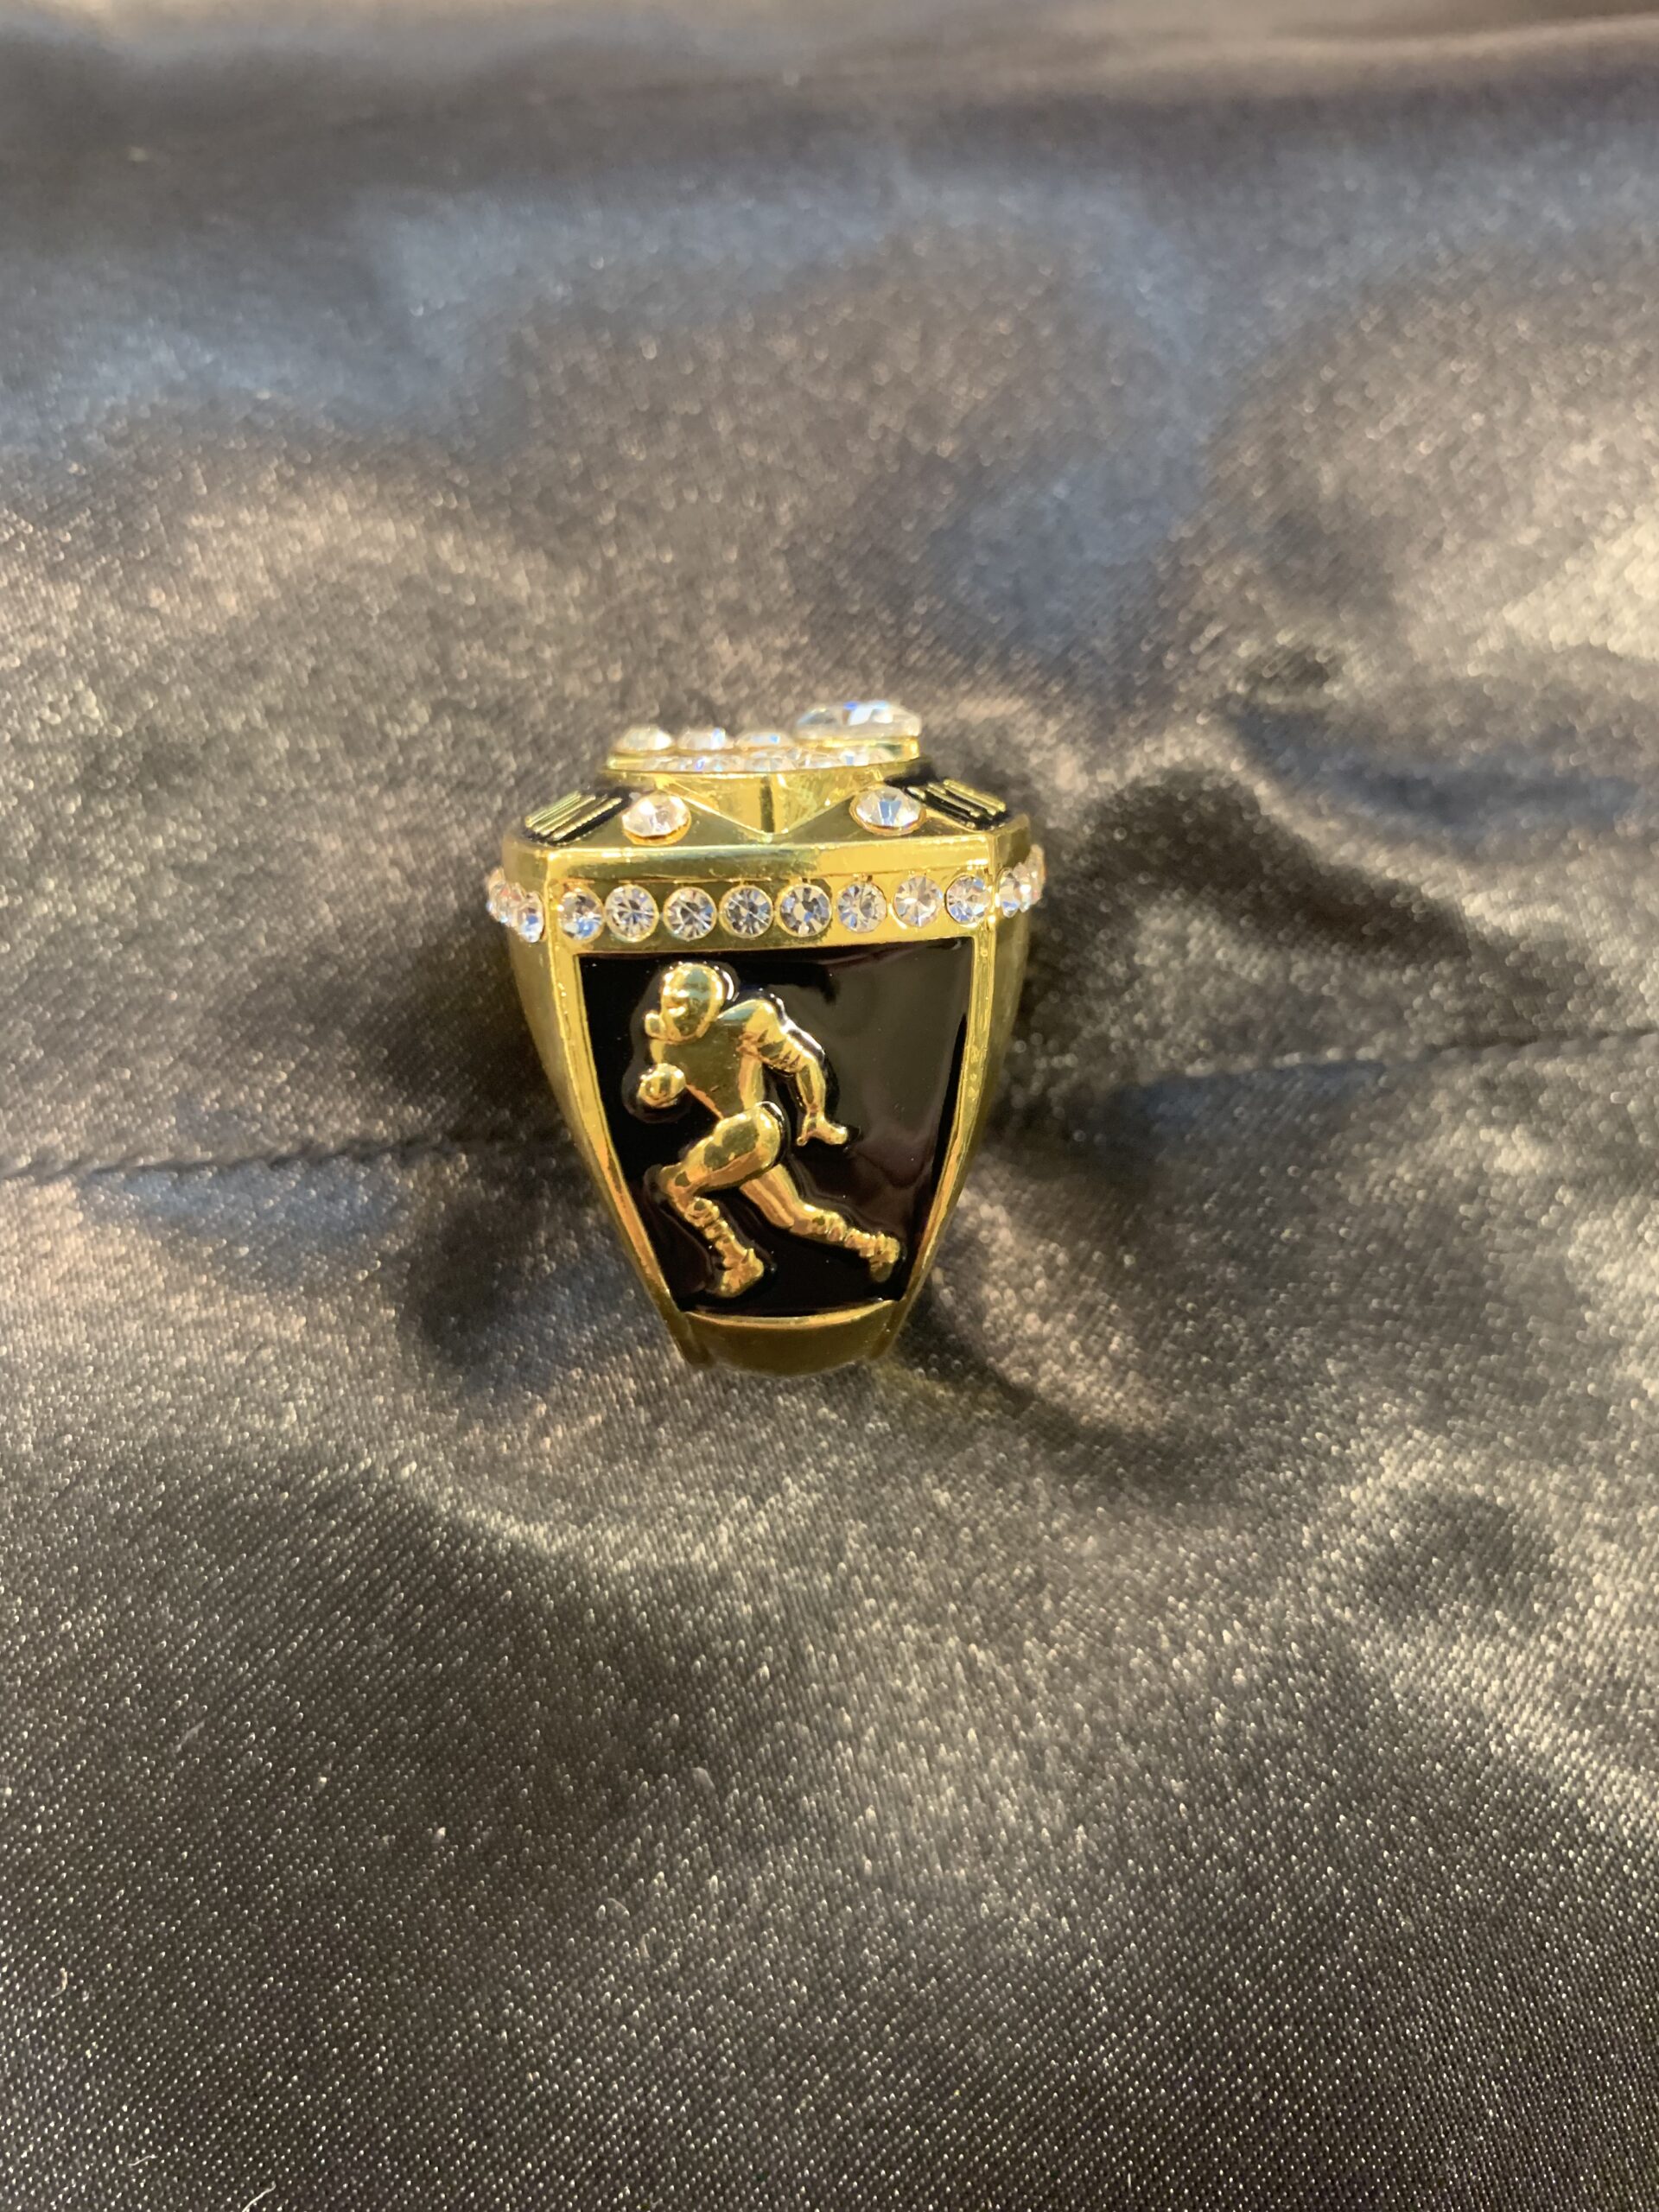 FOOTBALL CHAMPIONSHIP RING (24K REAL GOLD PLATED) Item # 24-09 – Discount  Sports Rings